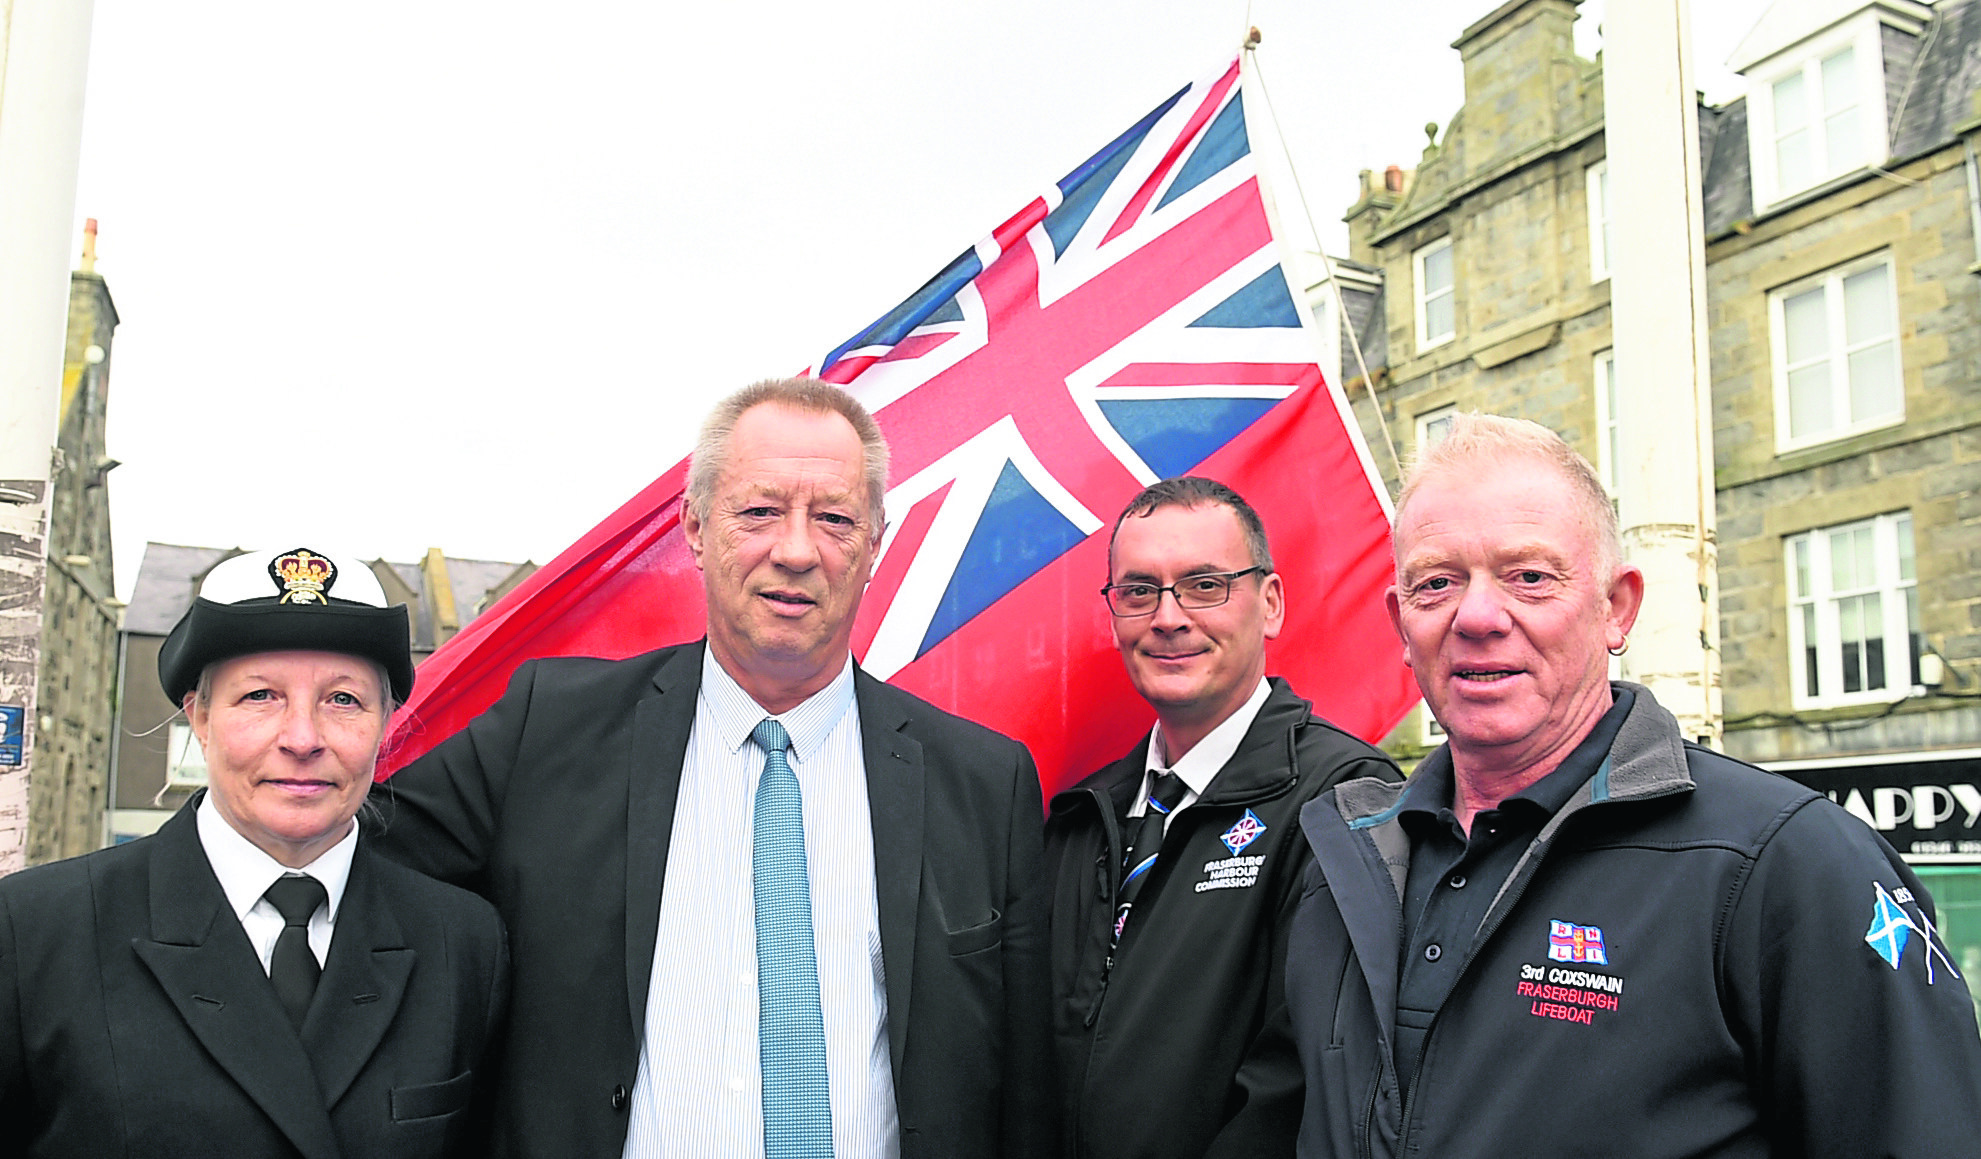 From left: Pat Davidson, Fraserburgh sea cadets, cllr Andy Kille, John Strachan, Fraserburgh harbour board, and John May, Fraserburgh life boat. 
Picture by Jim Irvine